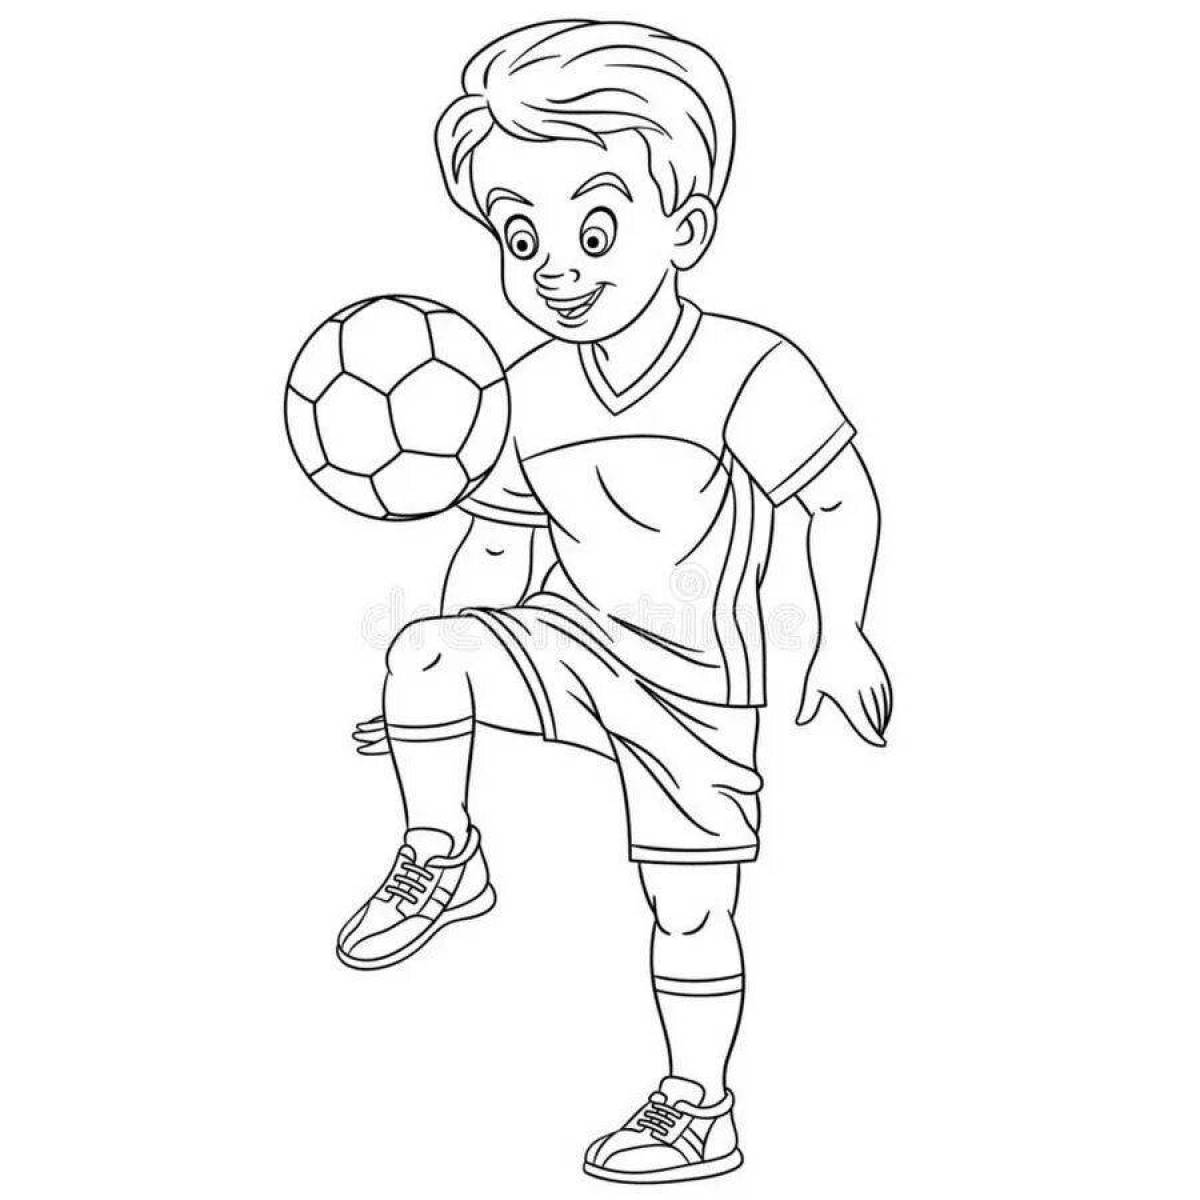 Coloring page cheerful boy playing football